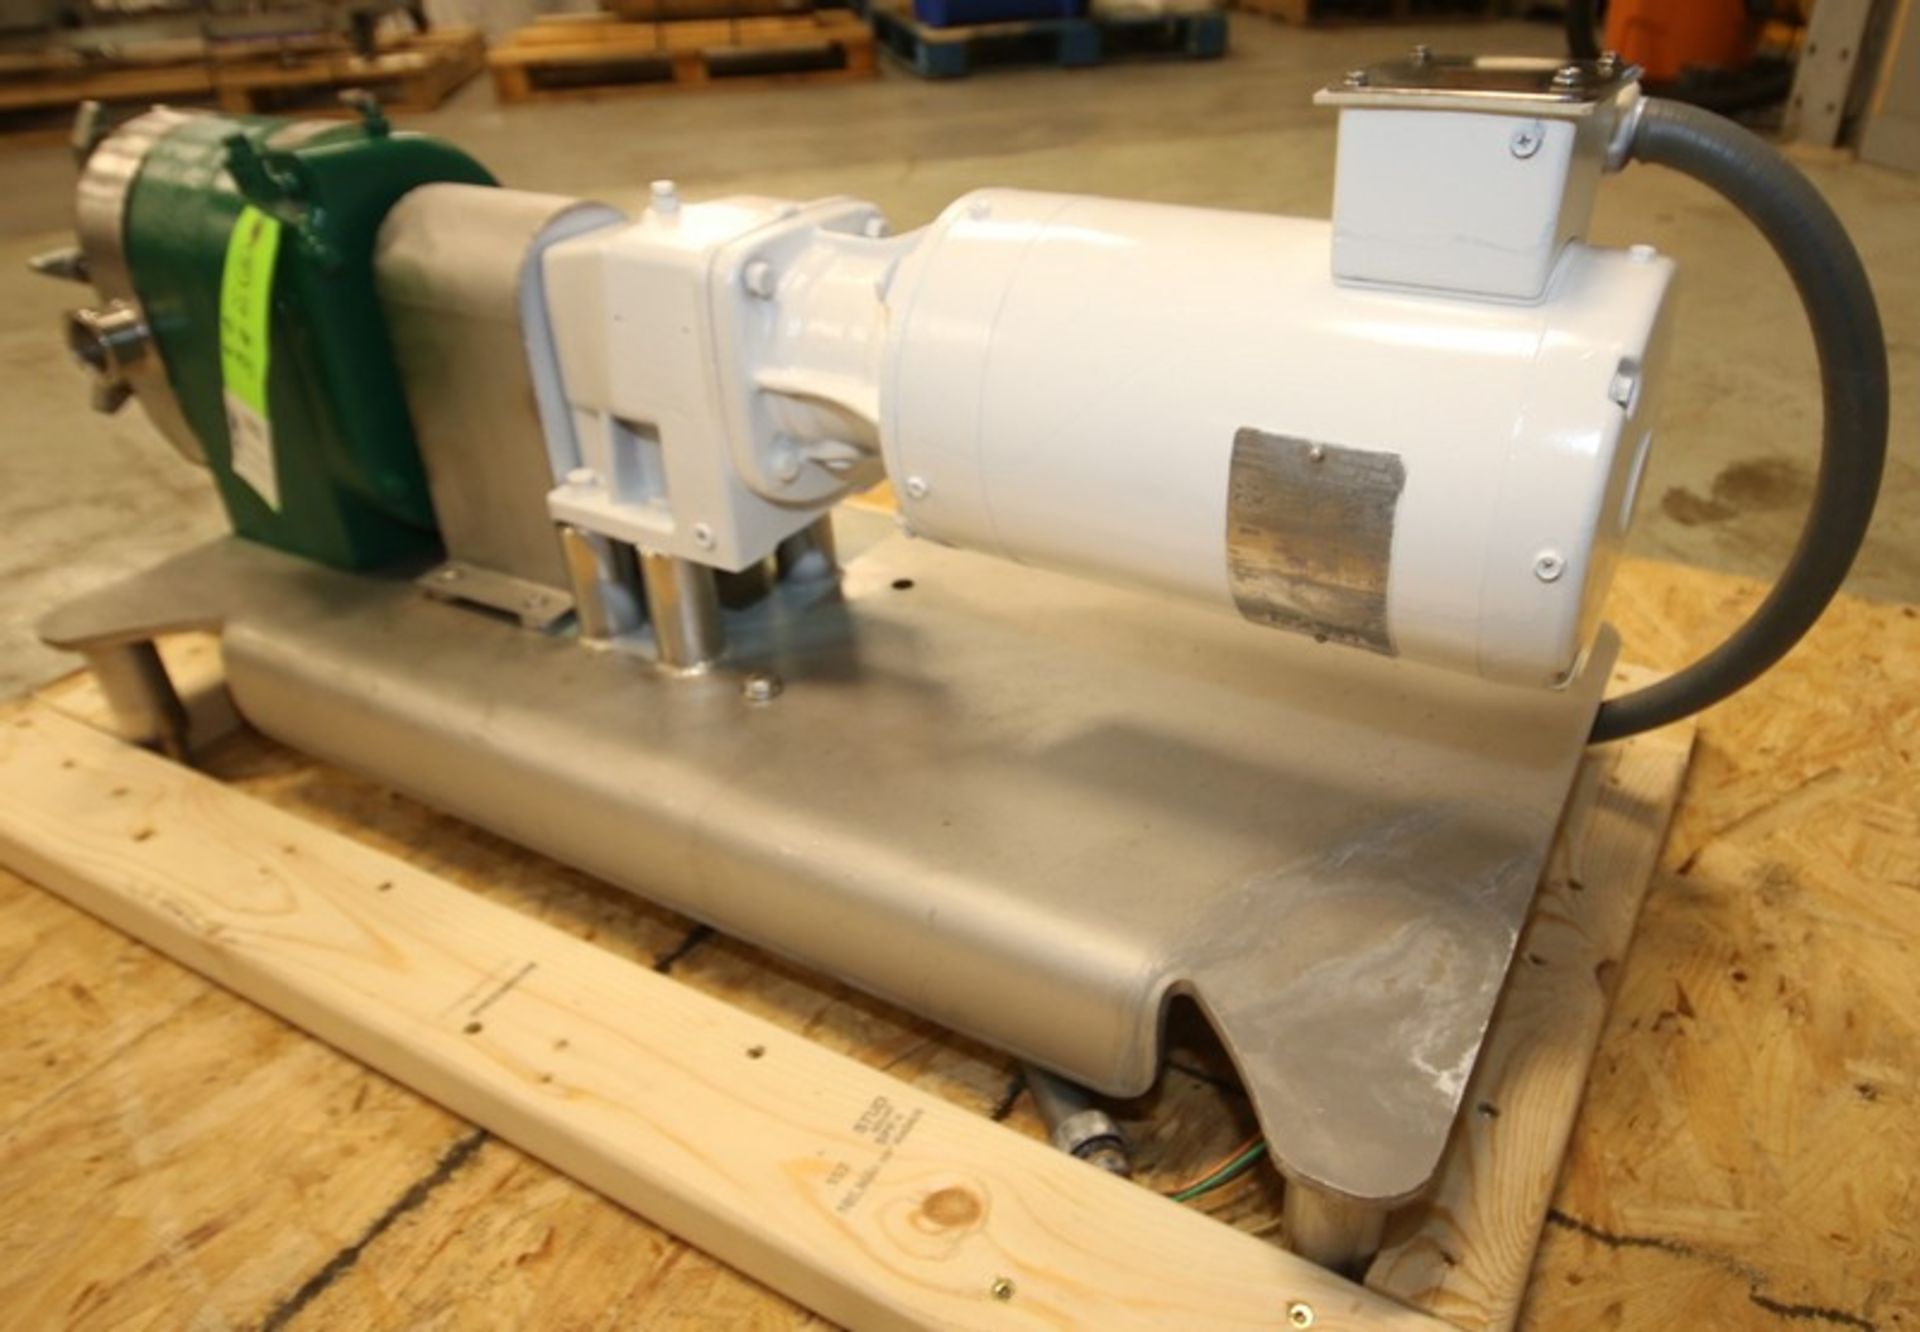 Tri Clover Positive Displacement Pump, Model PR25-1 1/2M-UC4-ST-S, S/N X3883, with 1 1/2" CT Head - Image 7 of 10